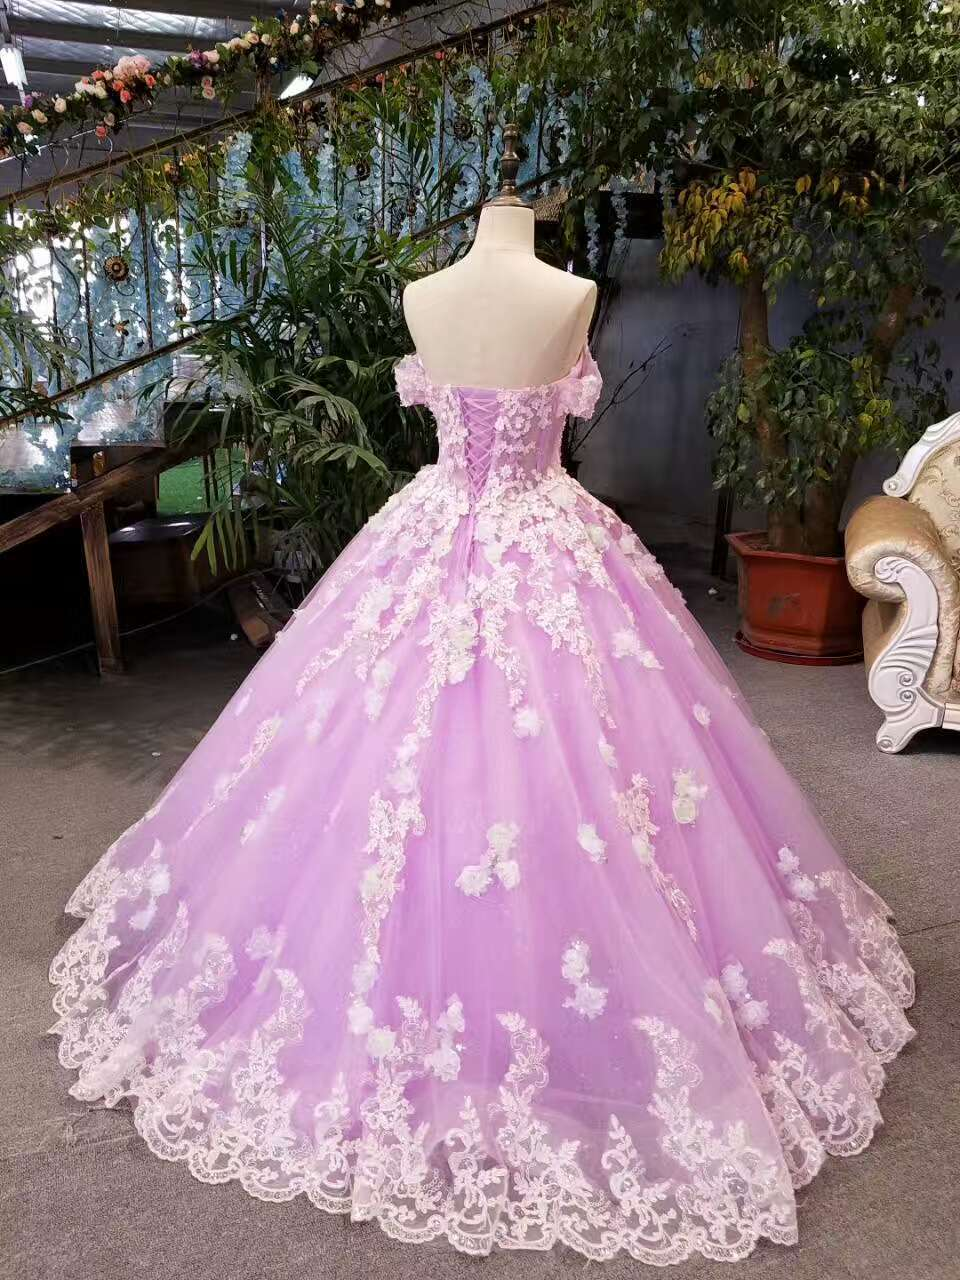 New Arrival Floral Wedding Dresses A-Line Floor Length Lace Up Off The Shoulder Ball Gown With Beads And Appliques Y1090